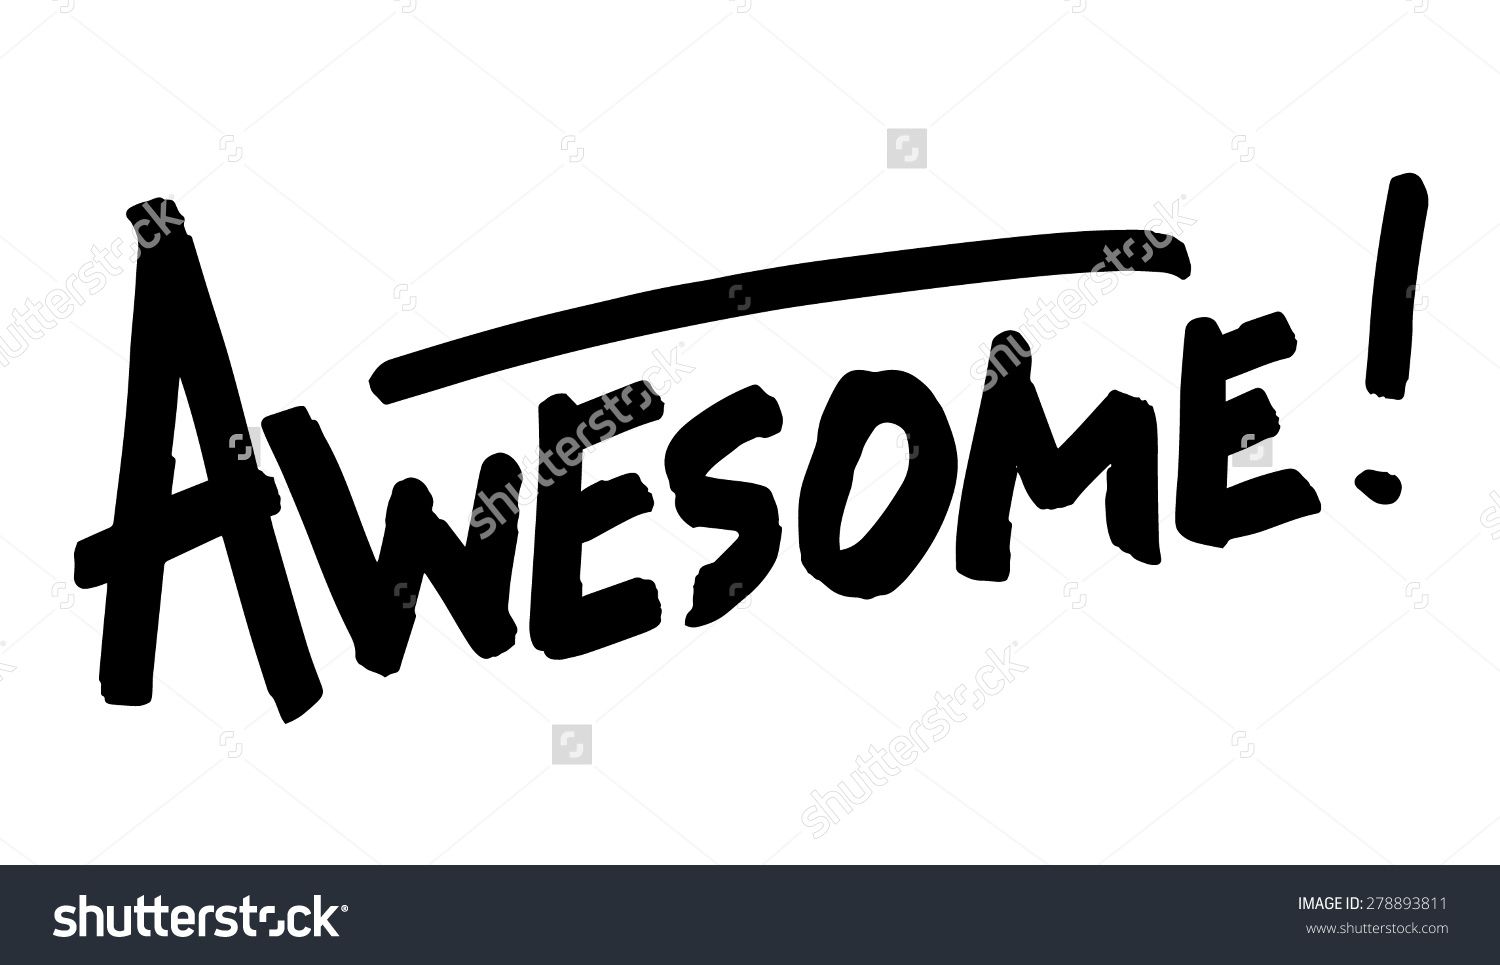 awesome clipart black and white